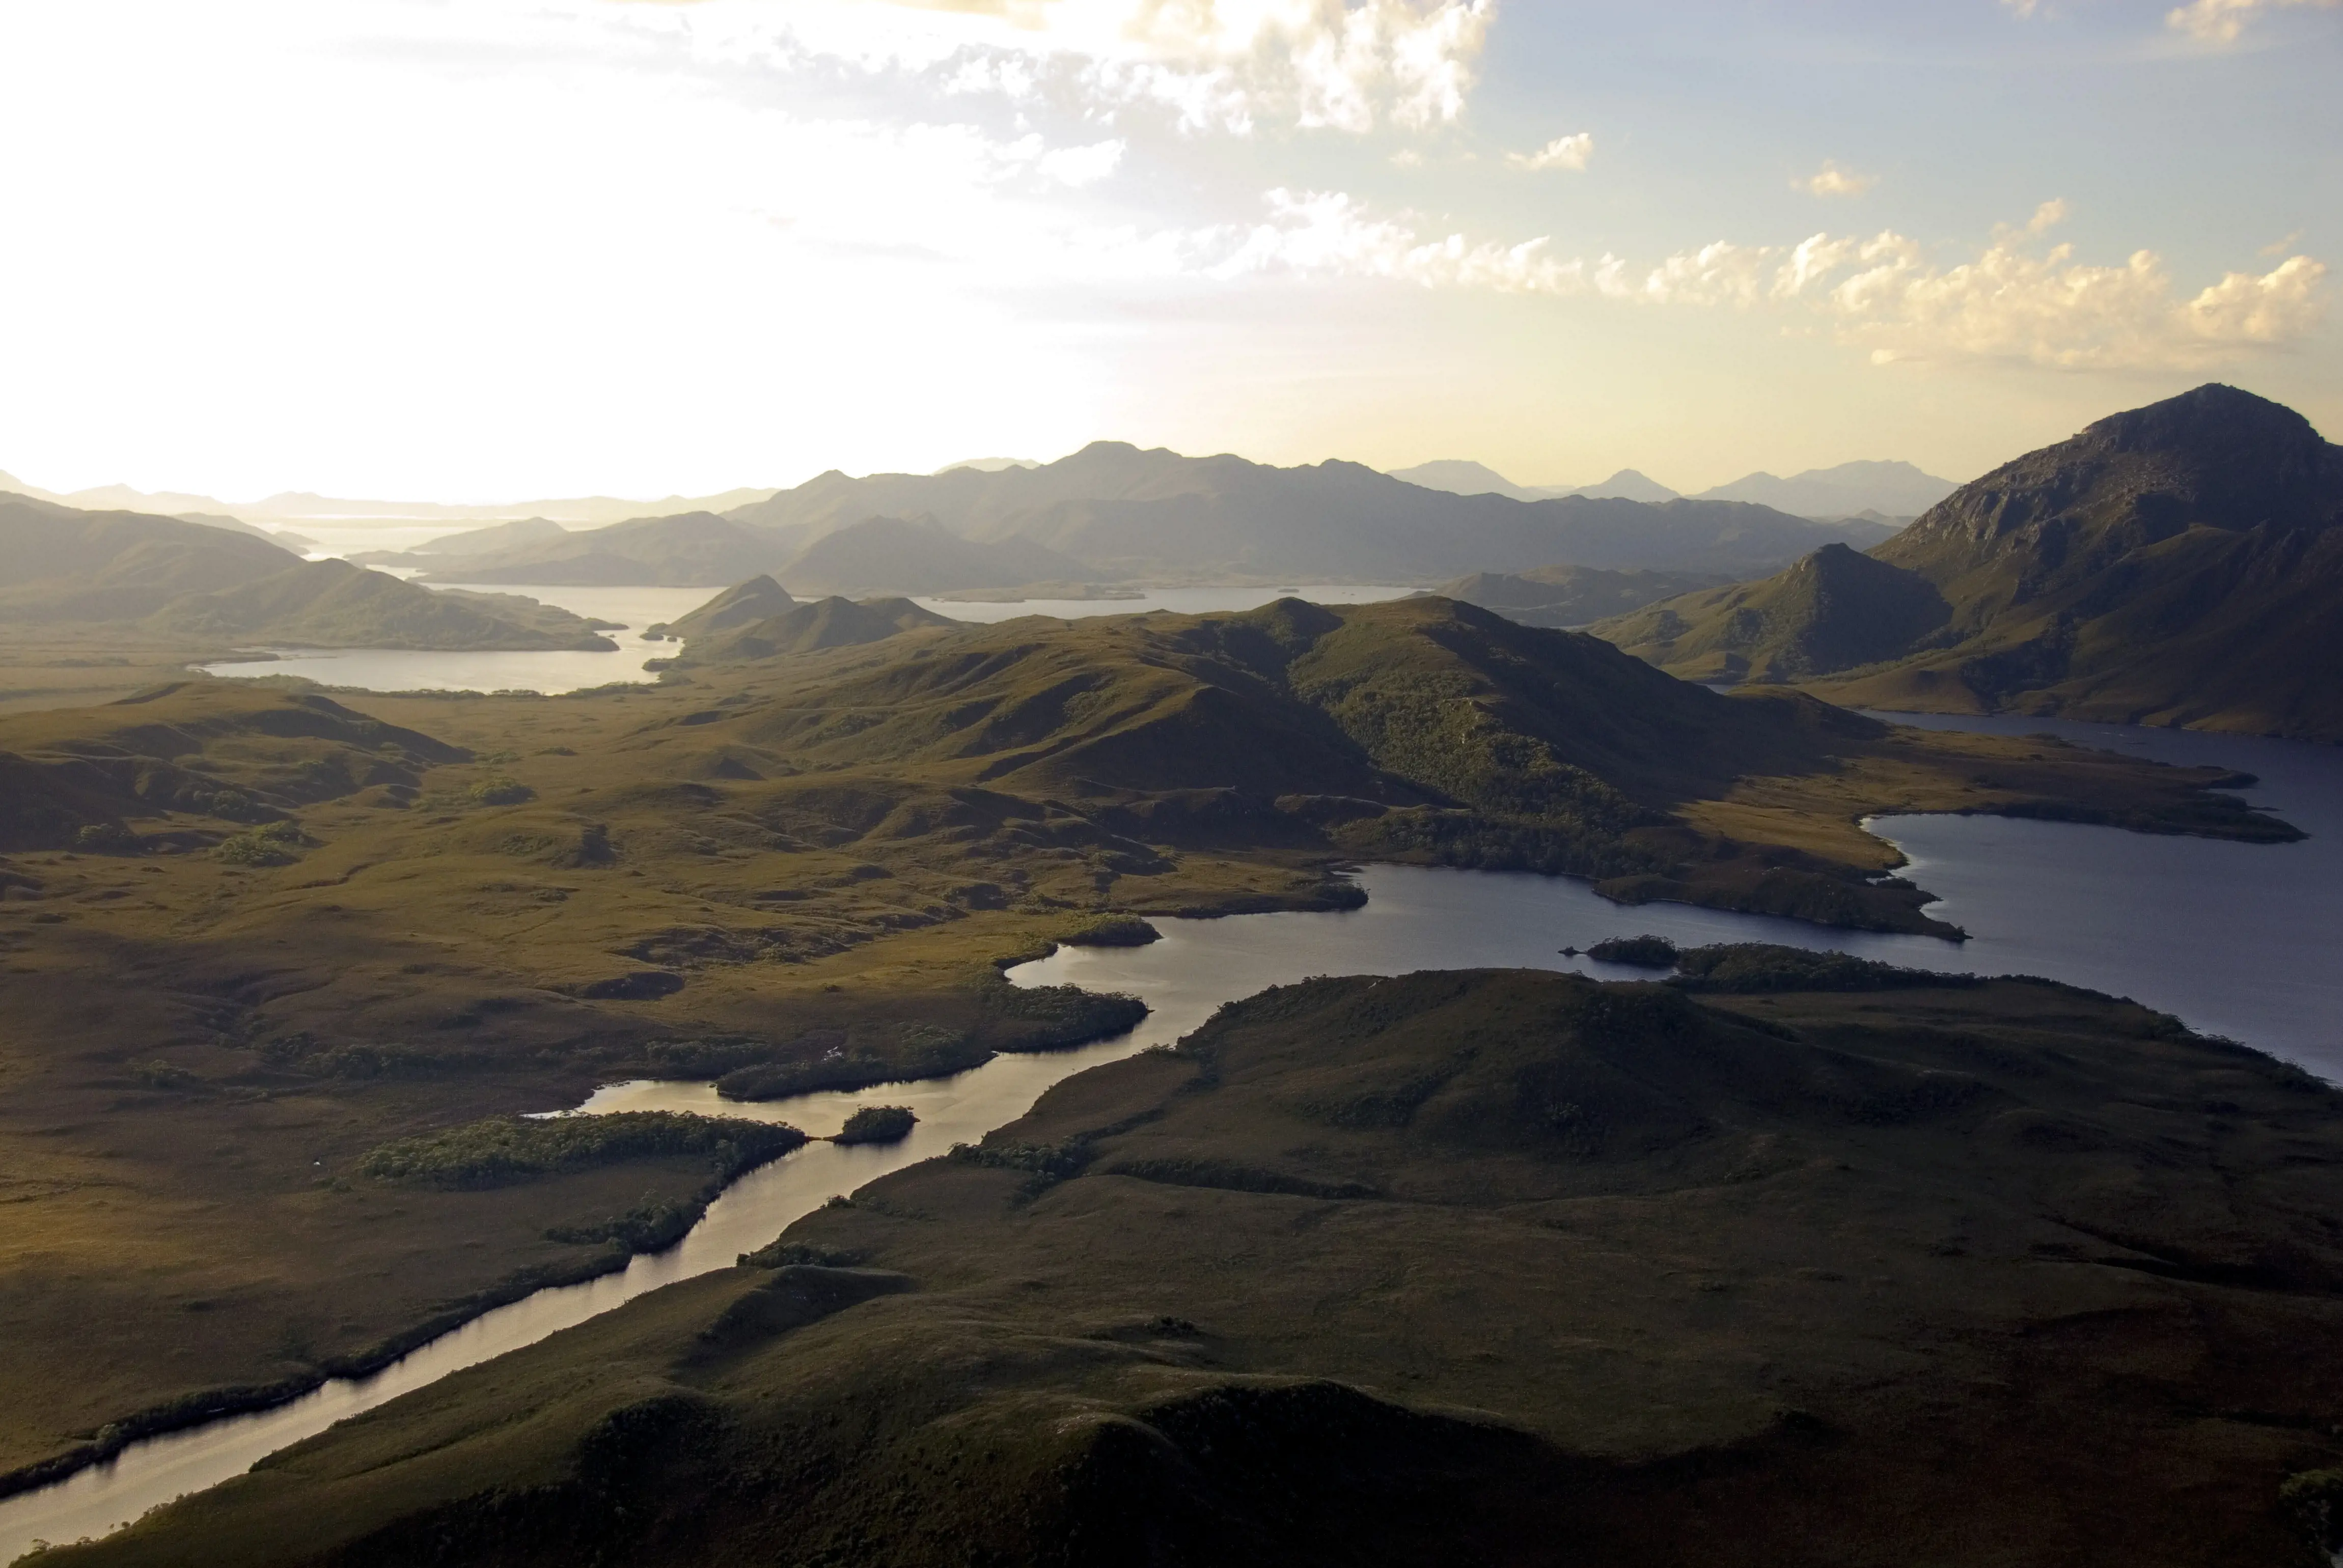 The Port Davey region of South west Tasmania. Landscape image of the rivers, quartzite peaks and extensive waterways.